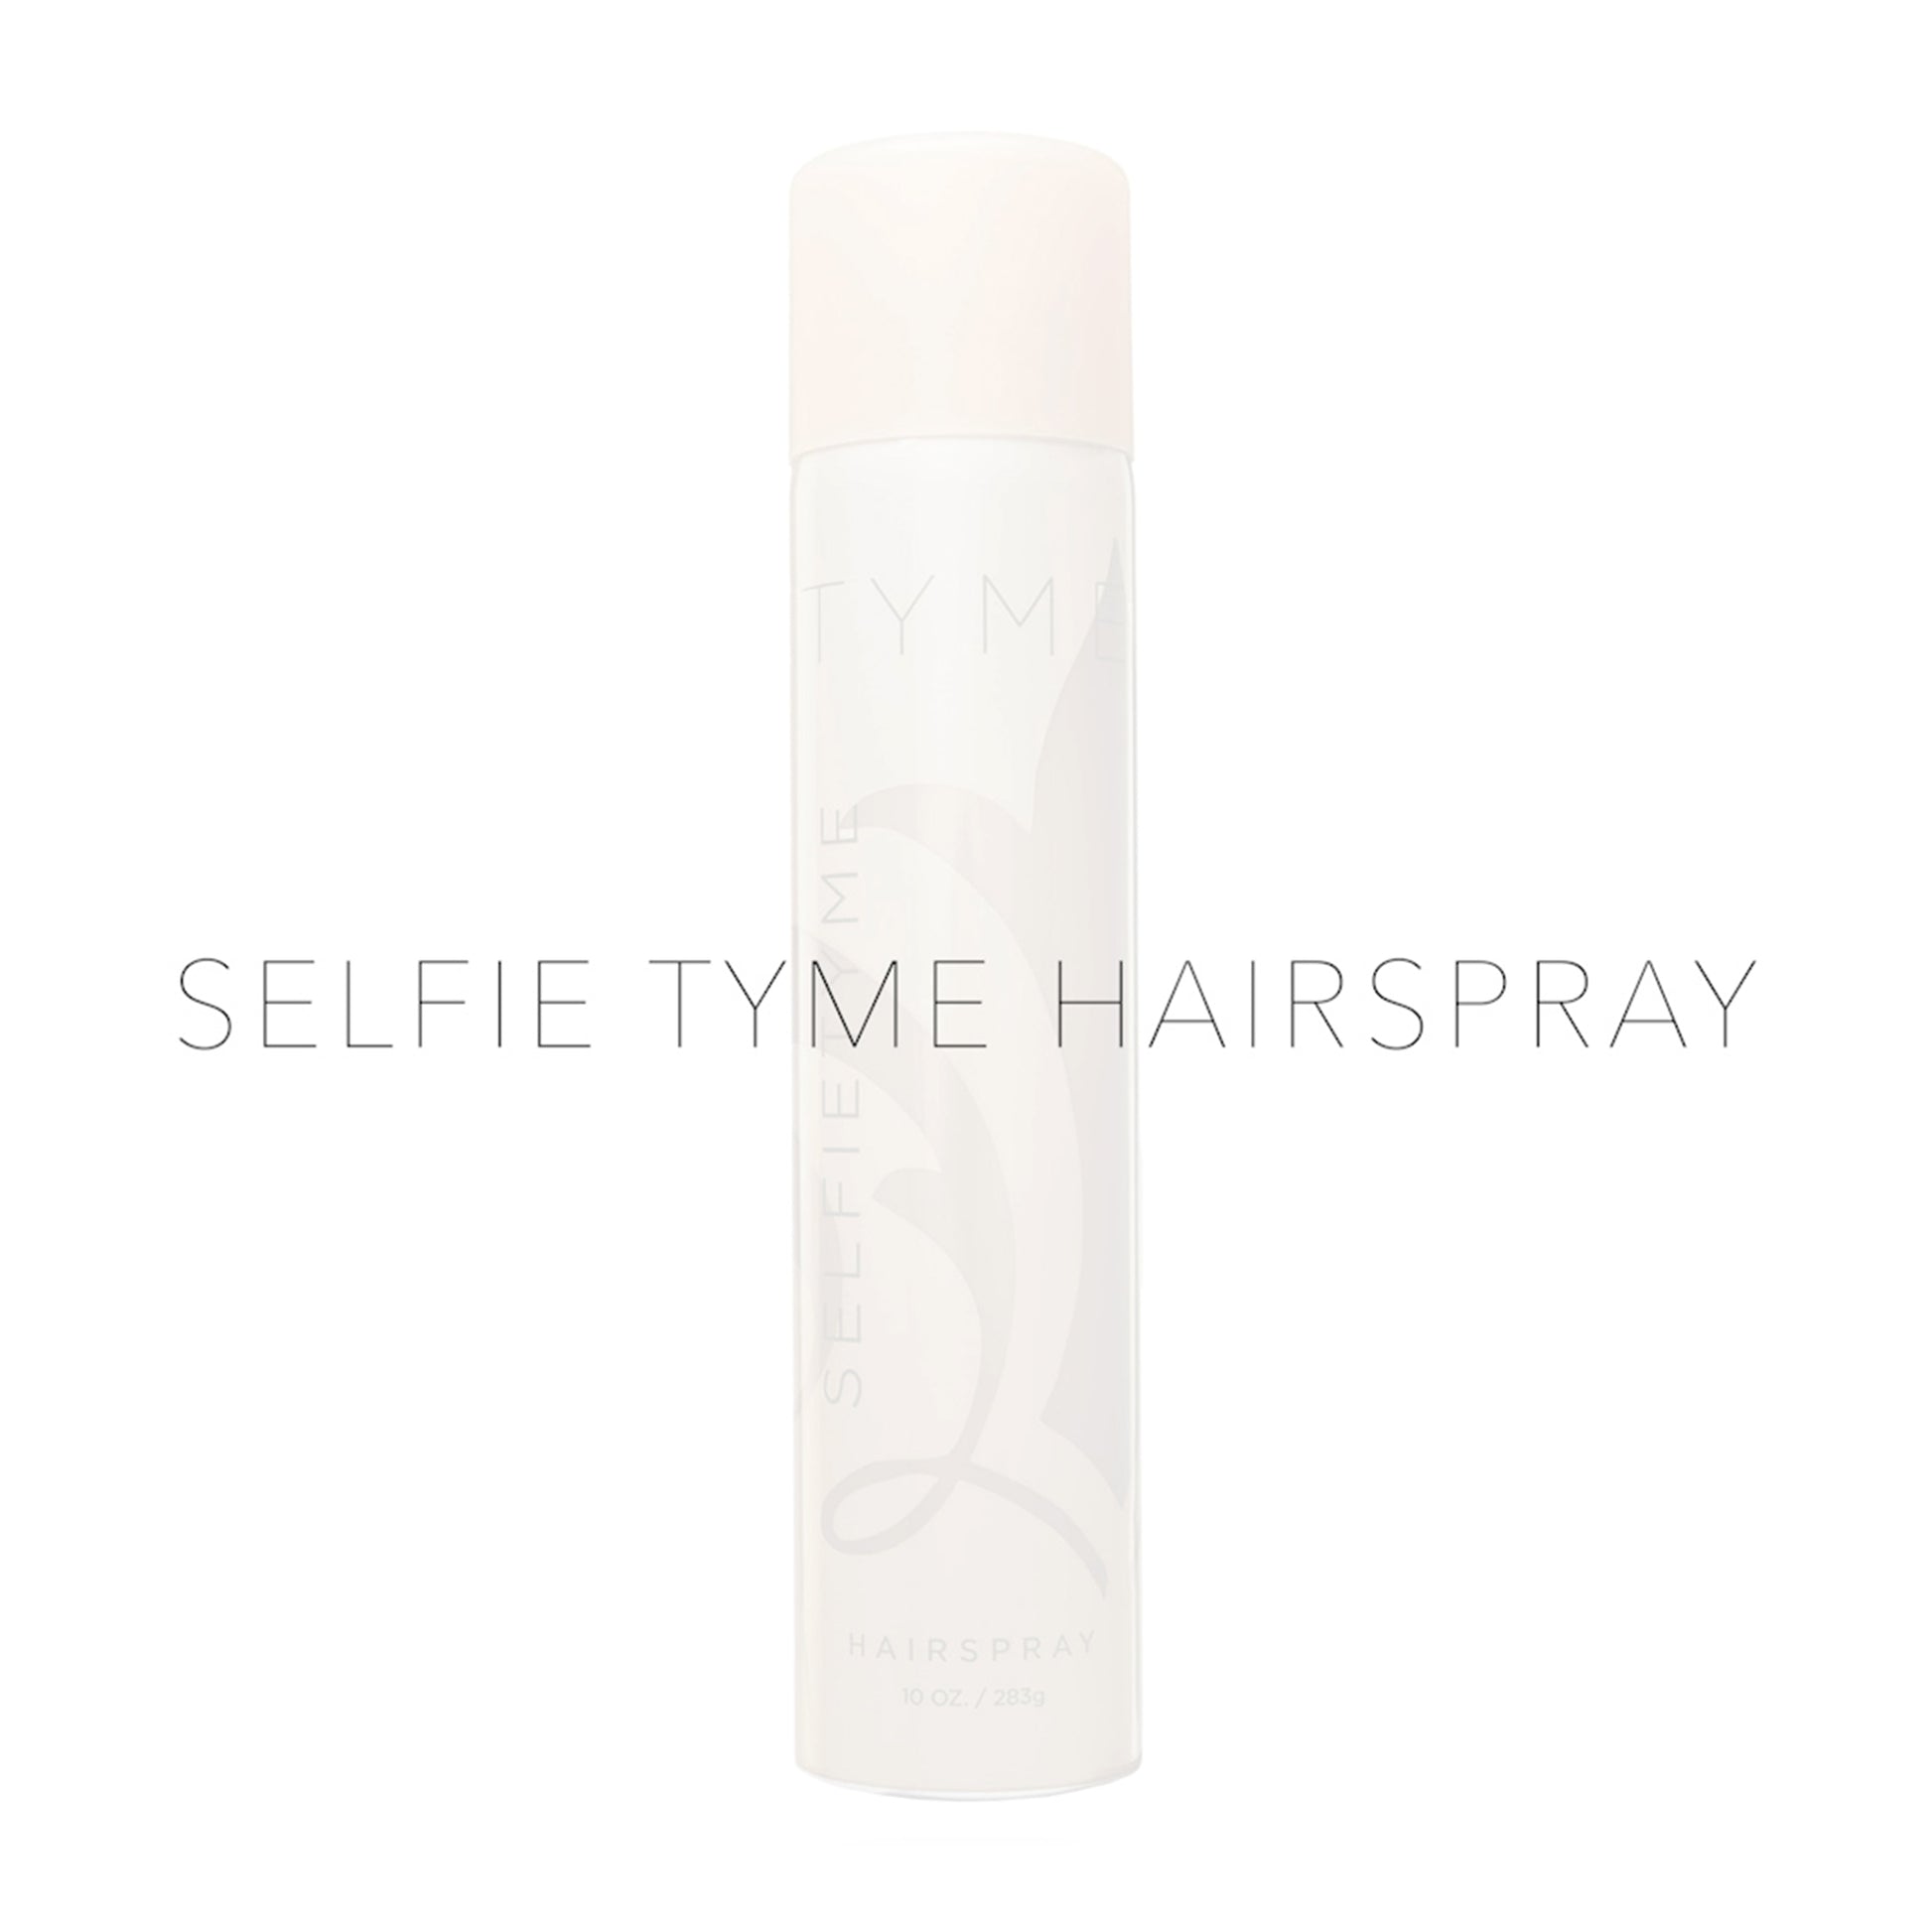 TYME Inventor and CEO, Jacynda Smith says the travel-sized SelfieTYME Hair Spray has a buildable strong hold formula.